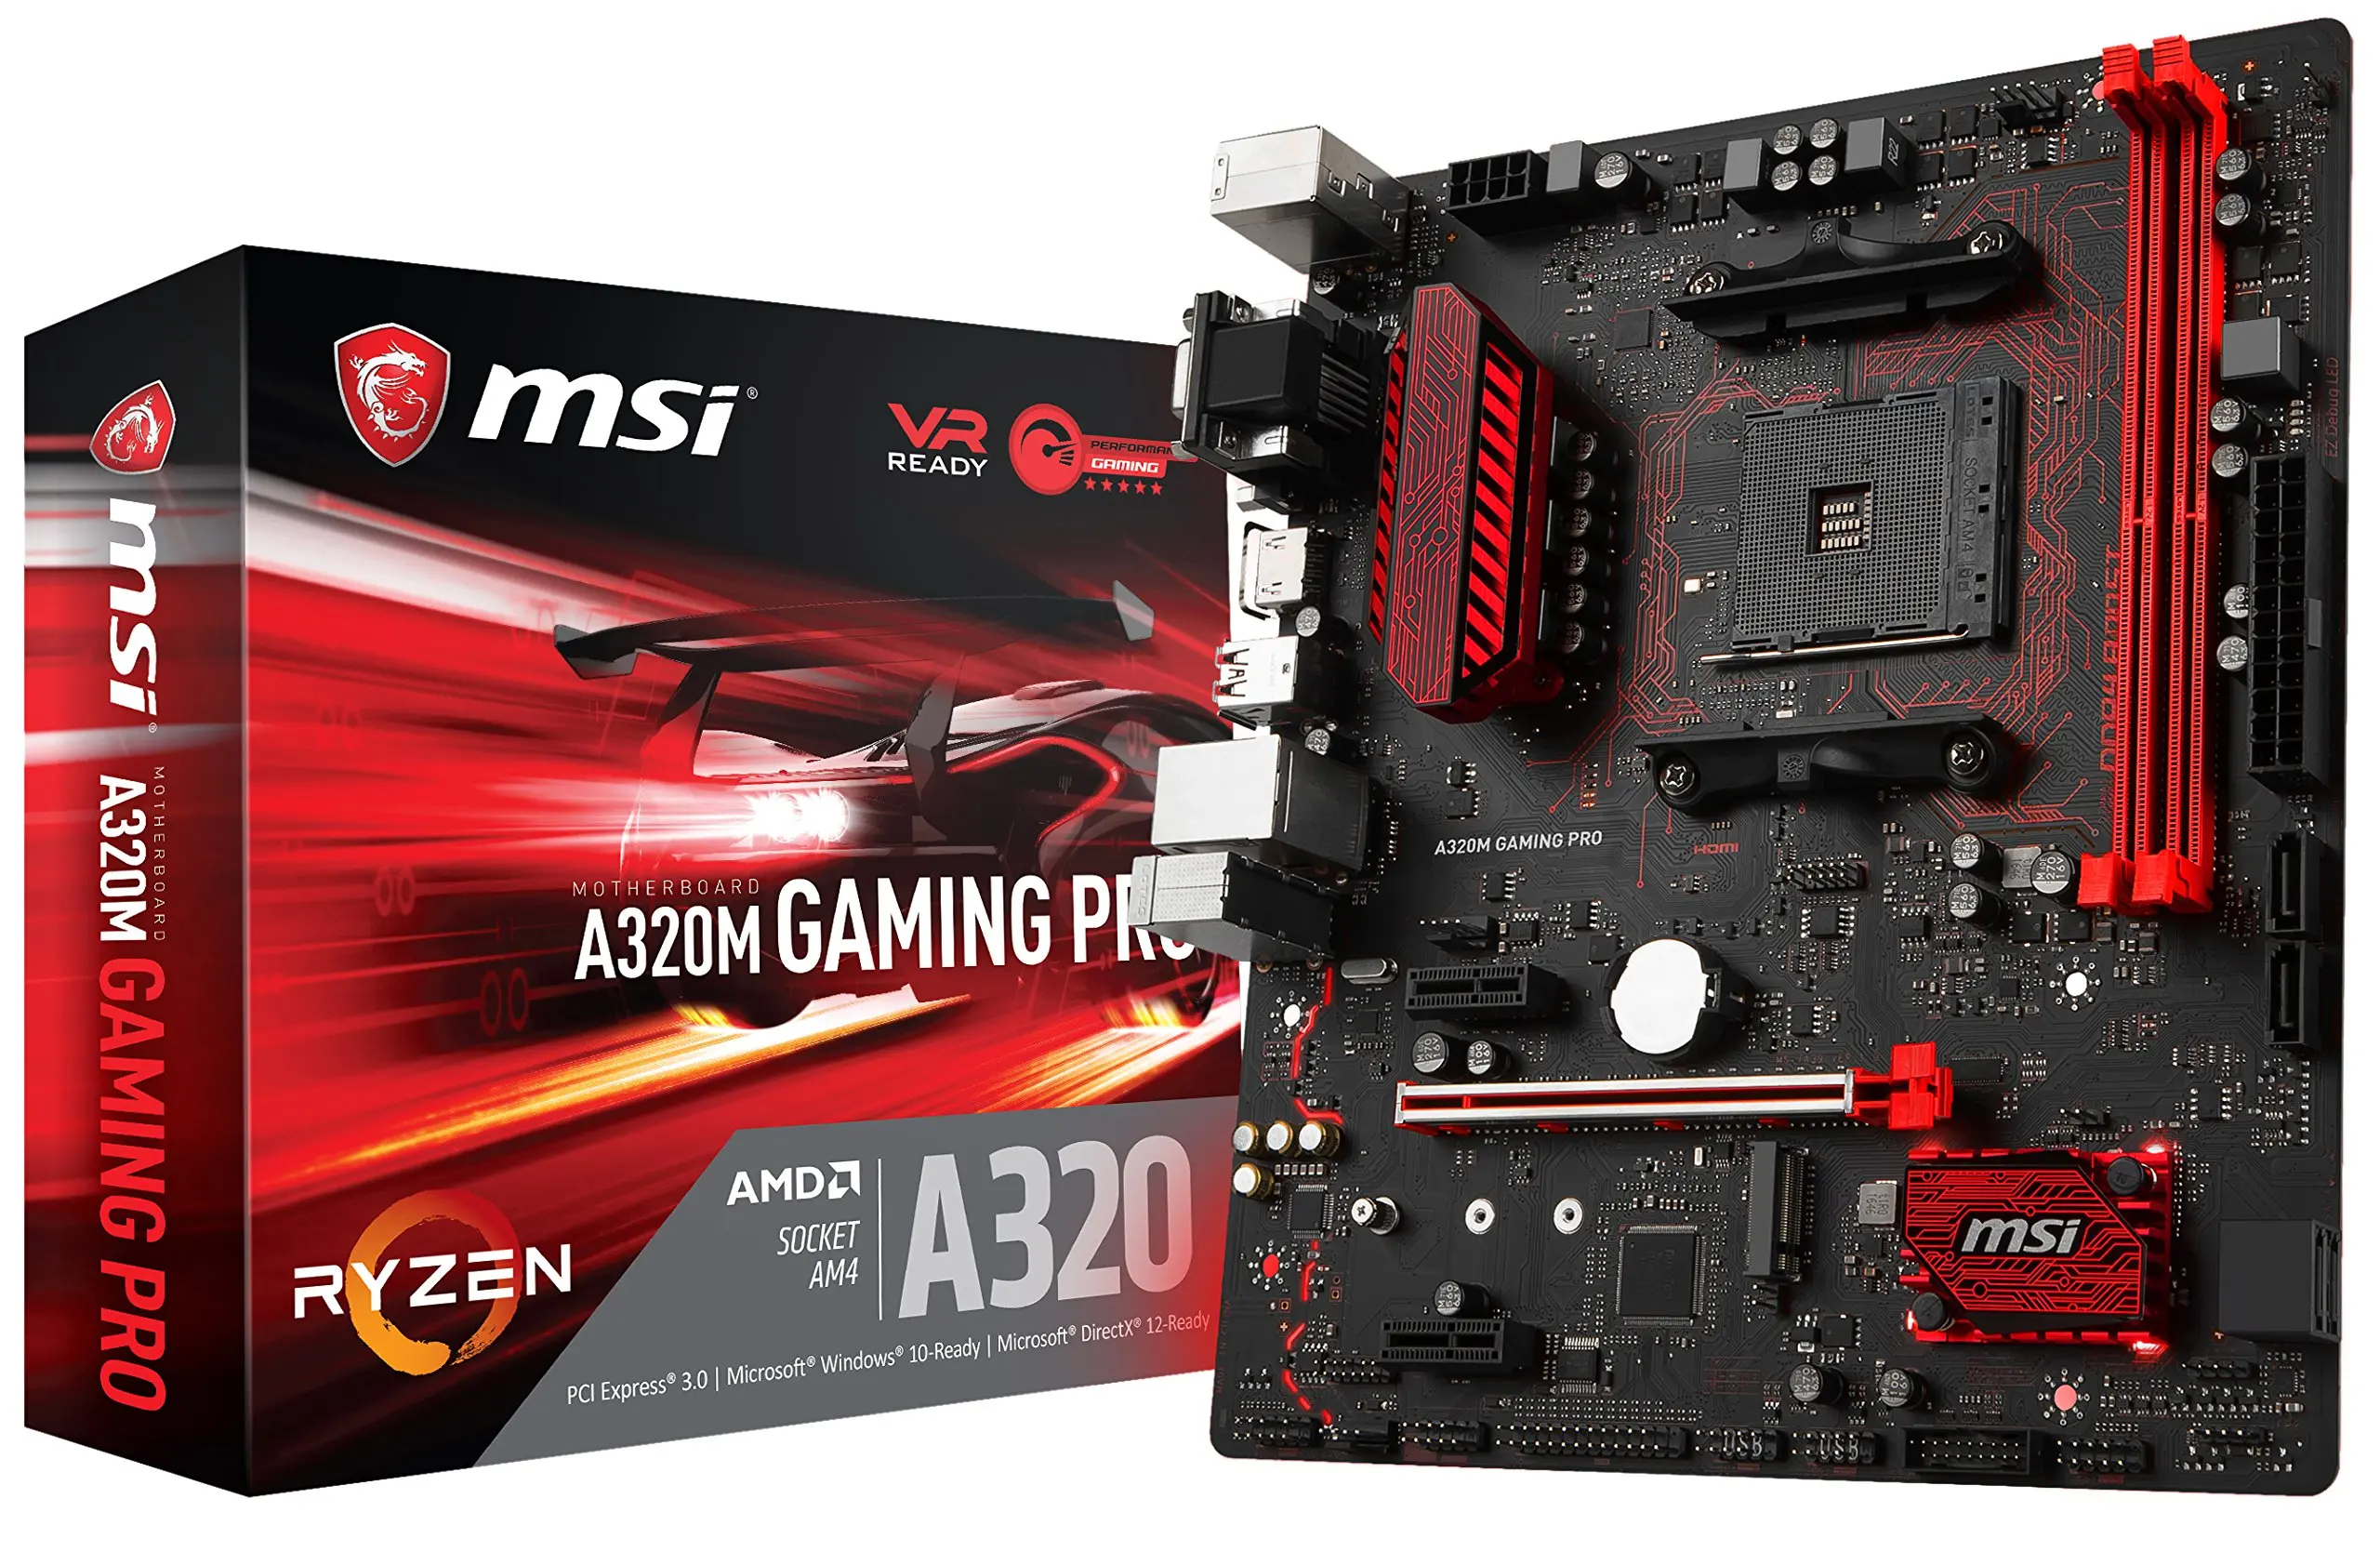 dual core 4th generation motherboard price